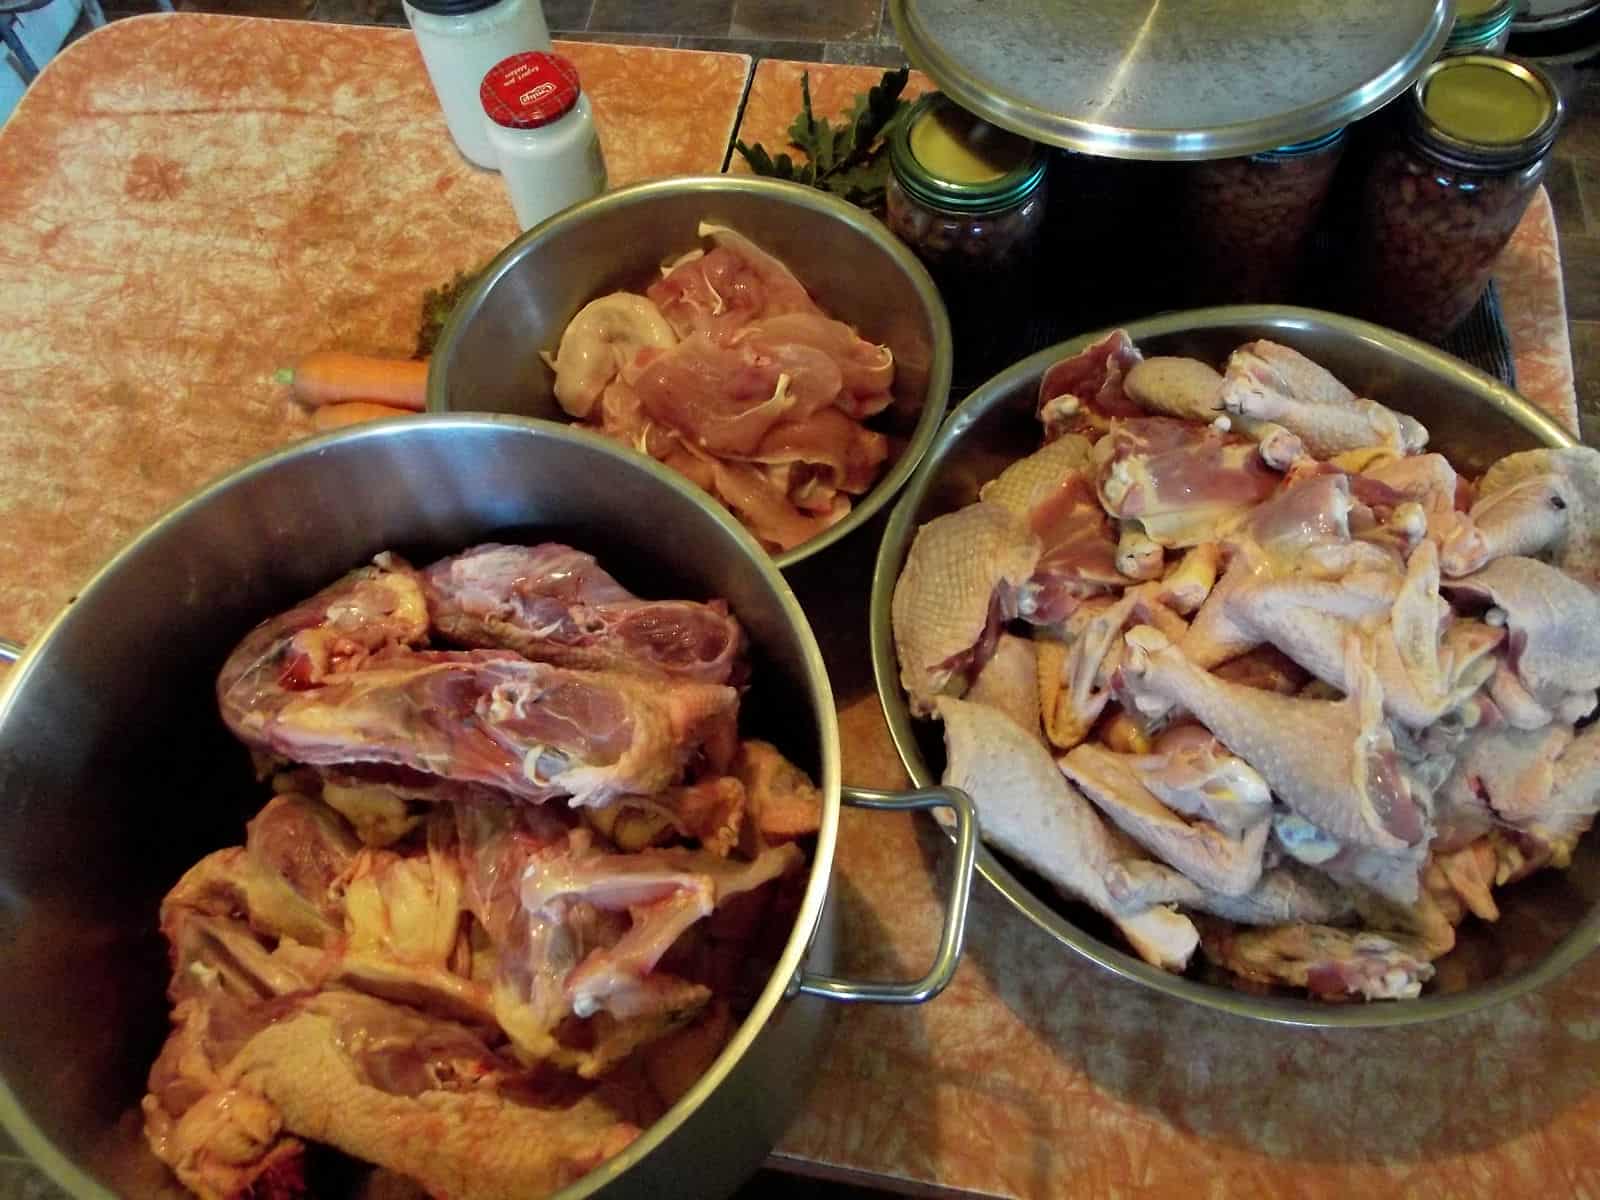 What I ended up with, from 14 chickens: A big pot of bones to turn into broth, a bowl of boneless skinless breast, and a bowlful of other pieces.